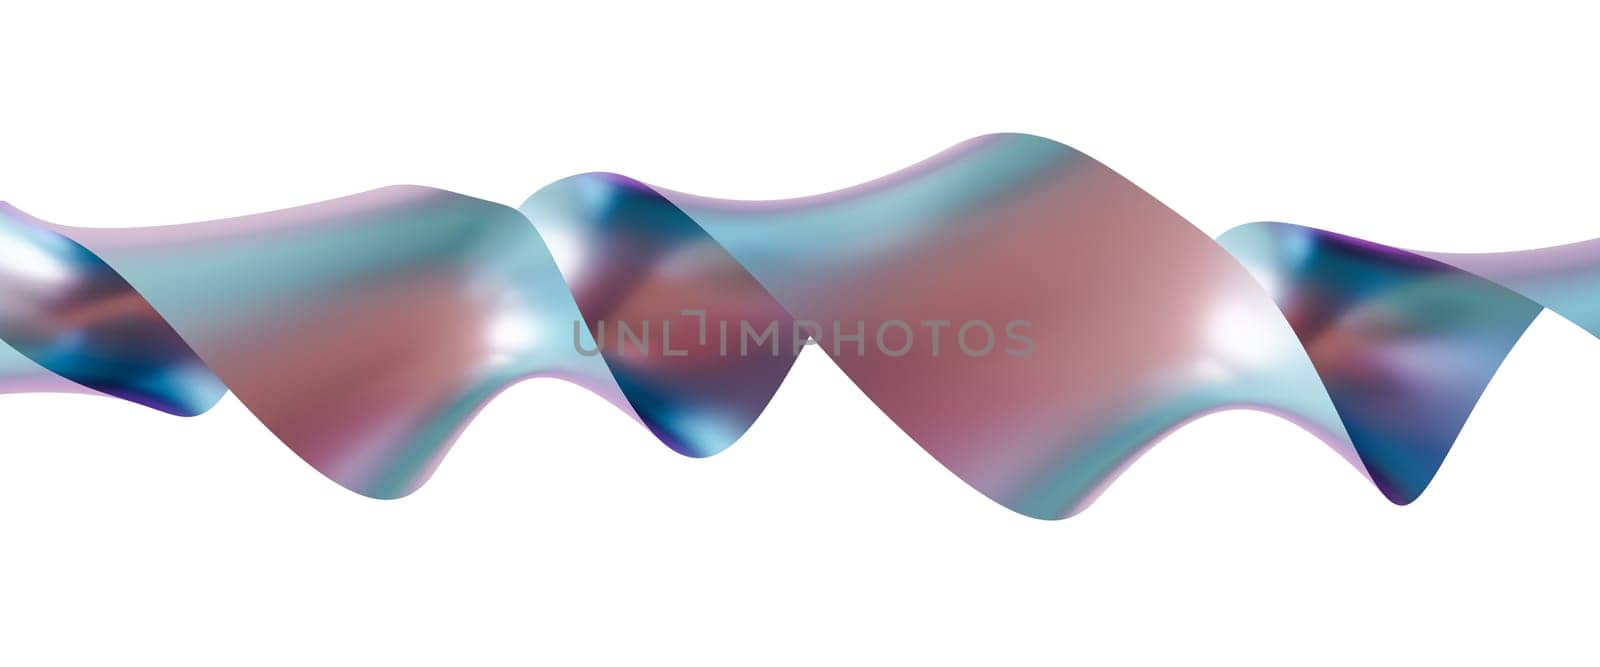 Holographic 3D ribbon isolated on white background. Metallic, iridescent band. Color gradient, y2k style. Cut out trendy and futuristic design element. 3D rendering. by creativebird